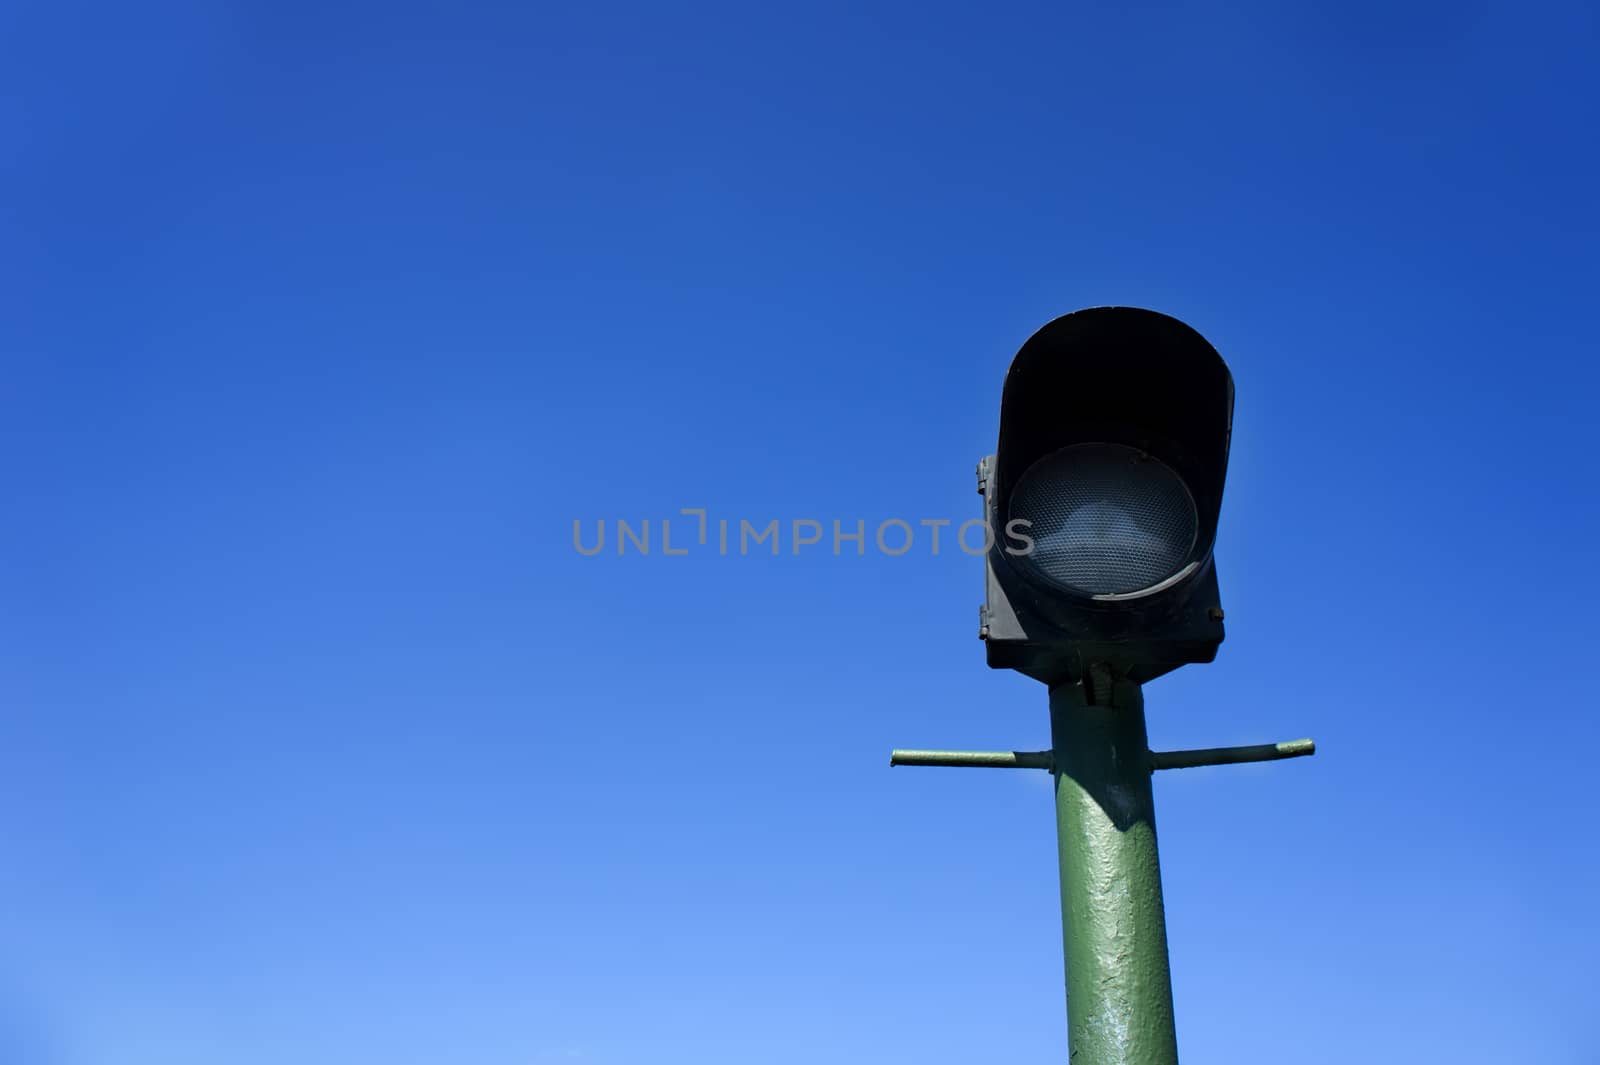 green lamppost on background of blue sky by wolegsan